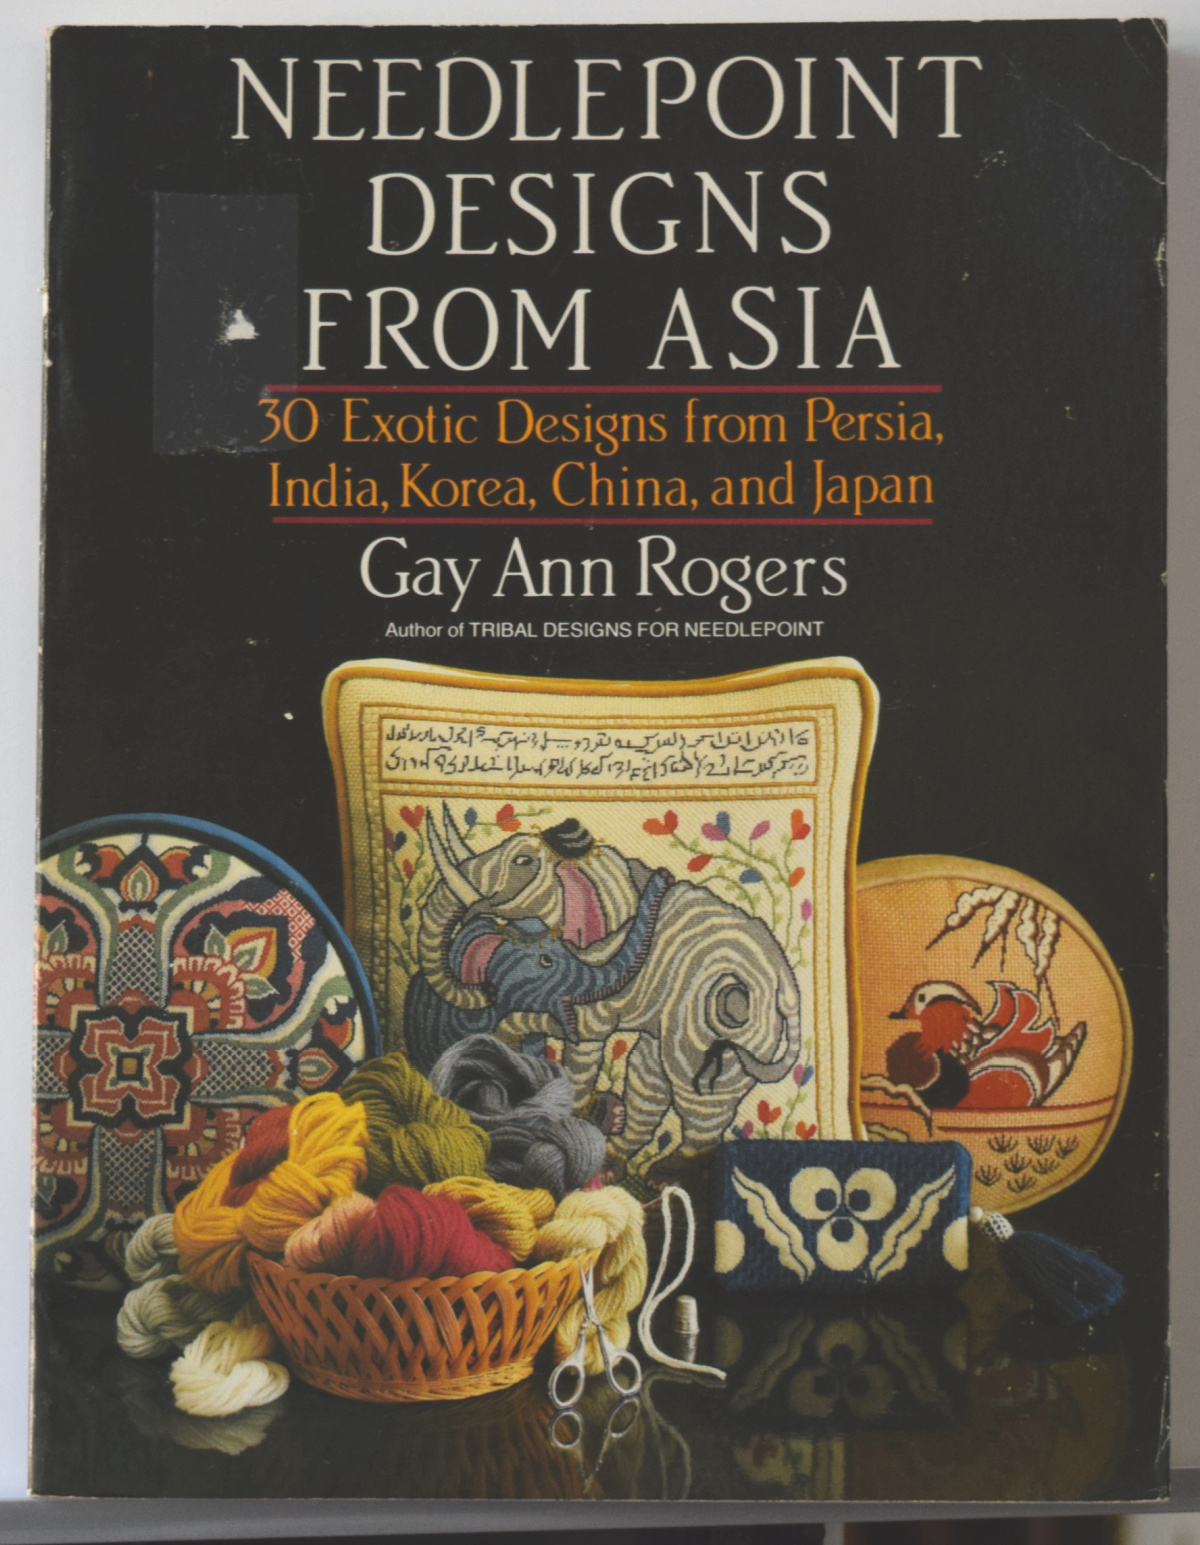 Needlepoint Designs from Asia by Gay Ann Rogers